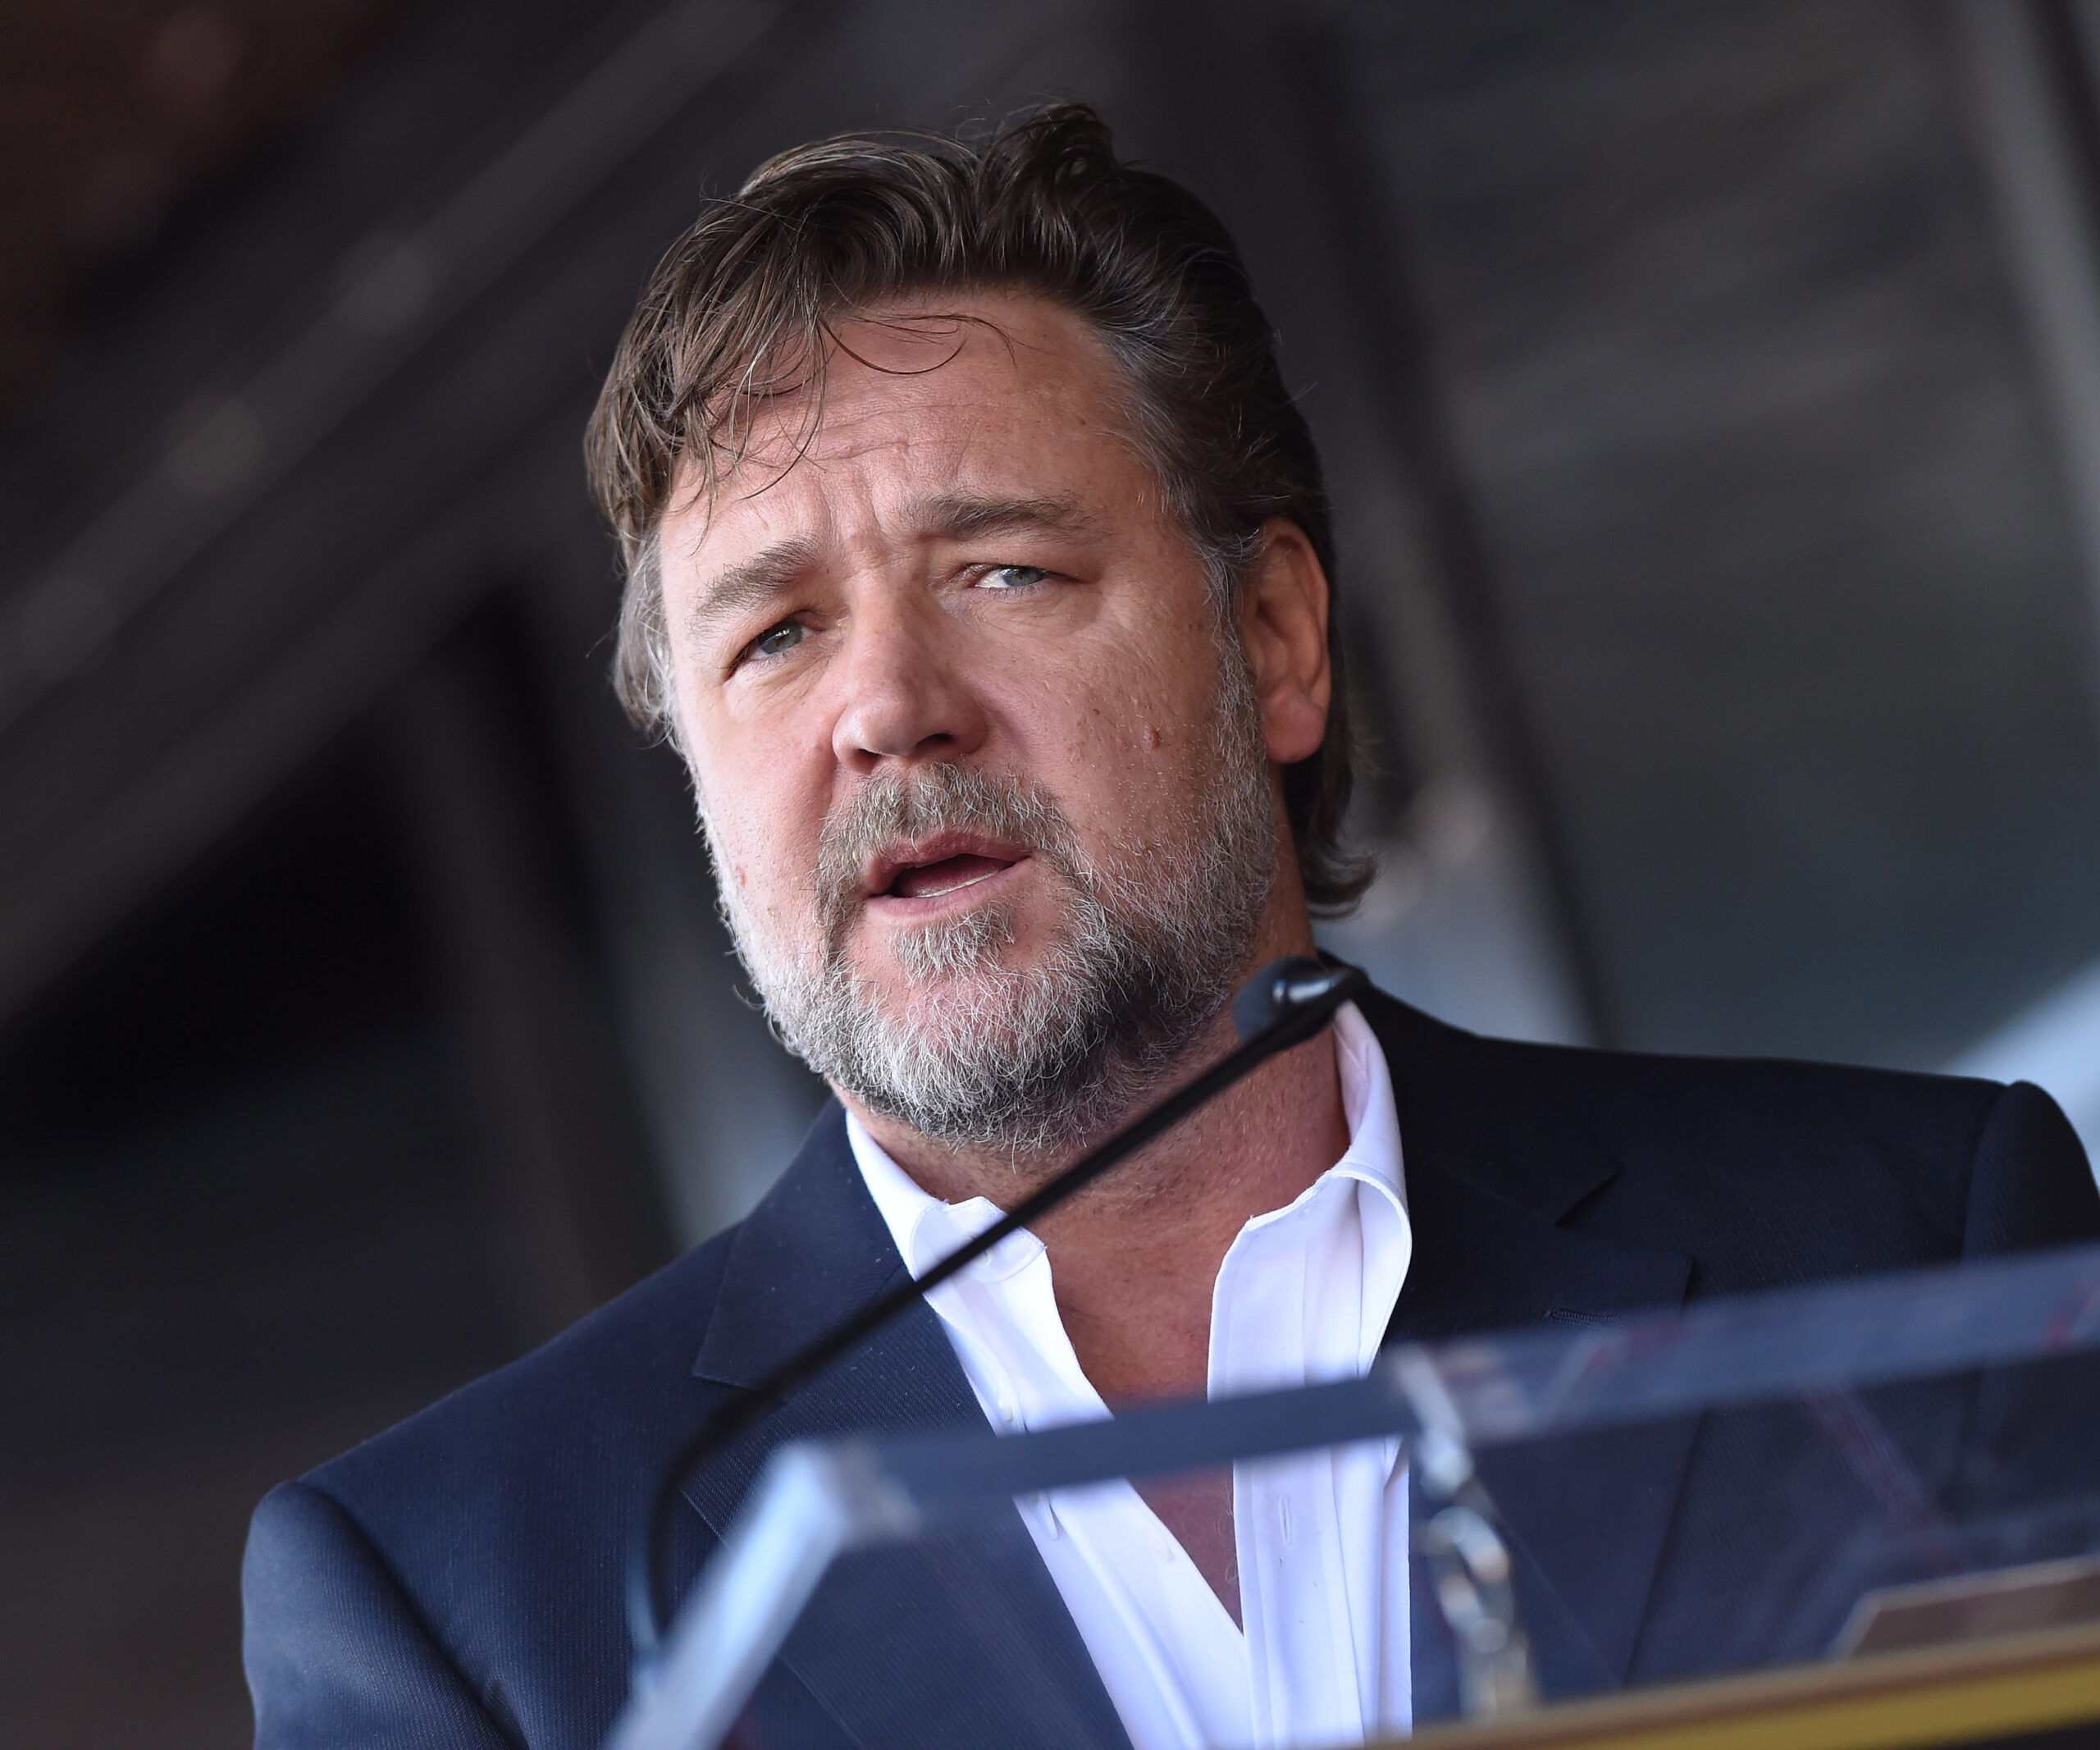 Russell Crowe’s nasty attack on player